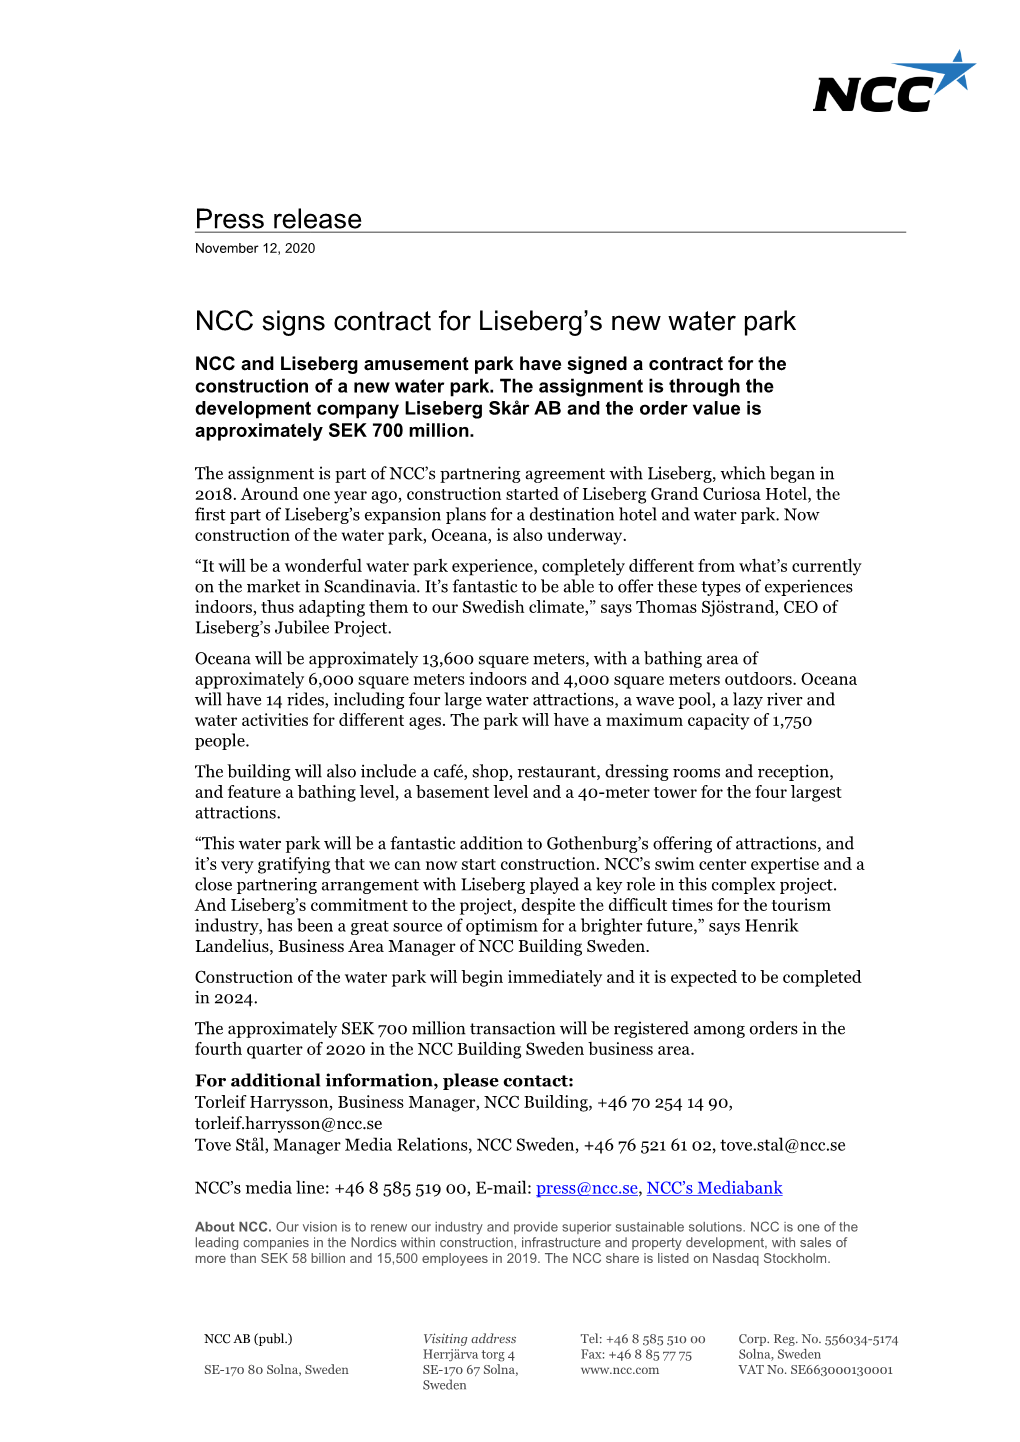 Press Release NCC Signs Contract for Liseberg's New Water Park